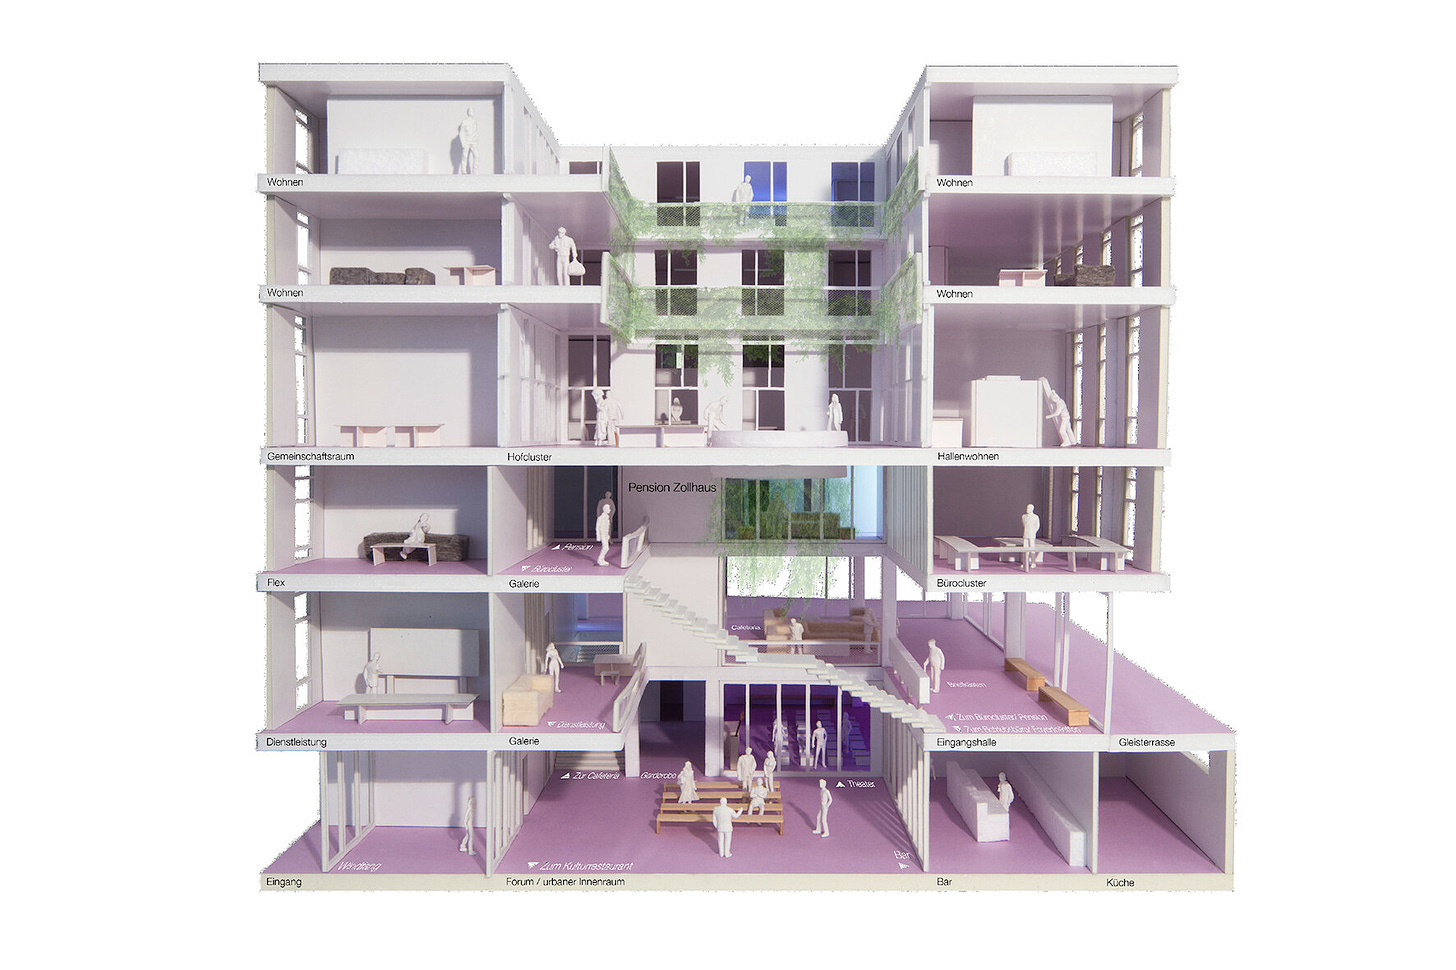 Figure 4. The Zollhaus, located in central Zurich, was designed by Enzmann Fischer Partner AG, the second project developed by Kalkbreite. As this cross section indicates, it will provide a mix of commercial and residential spaces, with apartments serving households from one to eight people. It will also boast two “hall apartments” in which people will build out their living environment within an open floor plan. The project is scheduled for completion in mid-2021. Courtesy of Enzmann Fischer Partner AG.